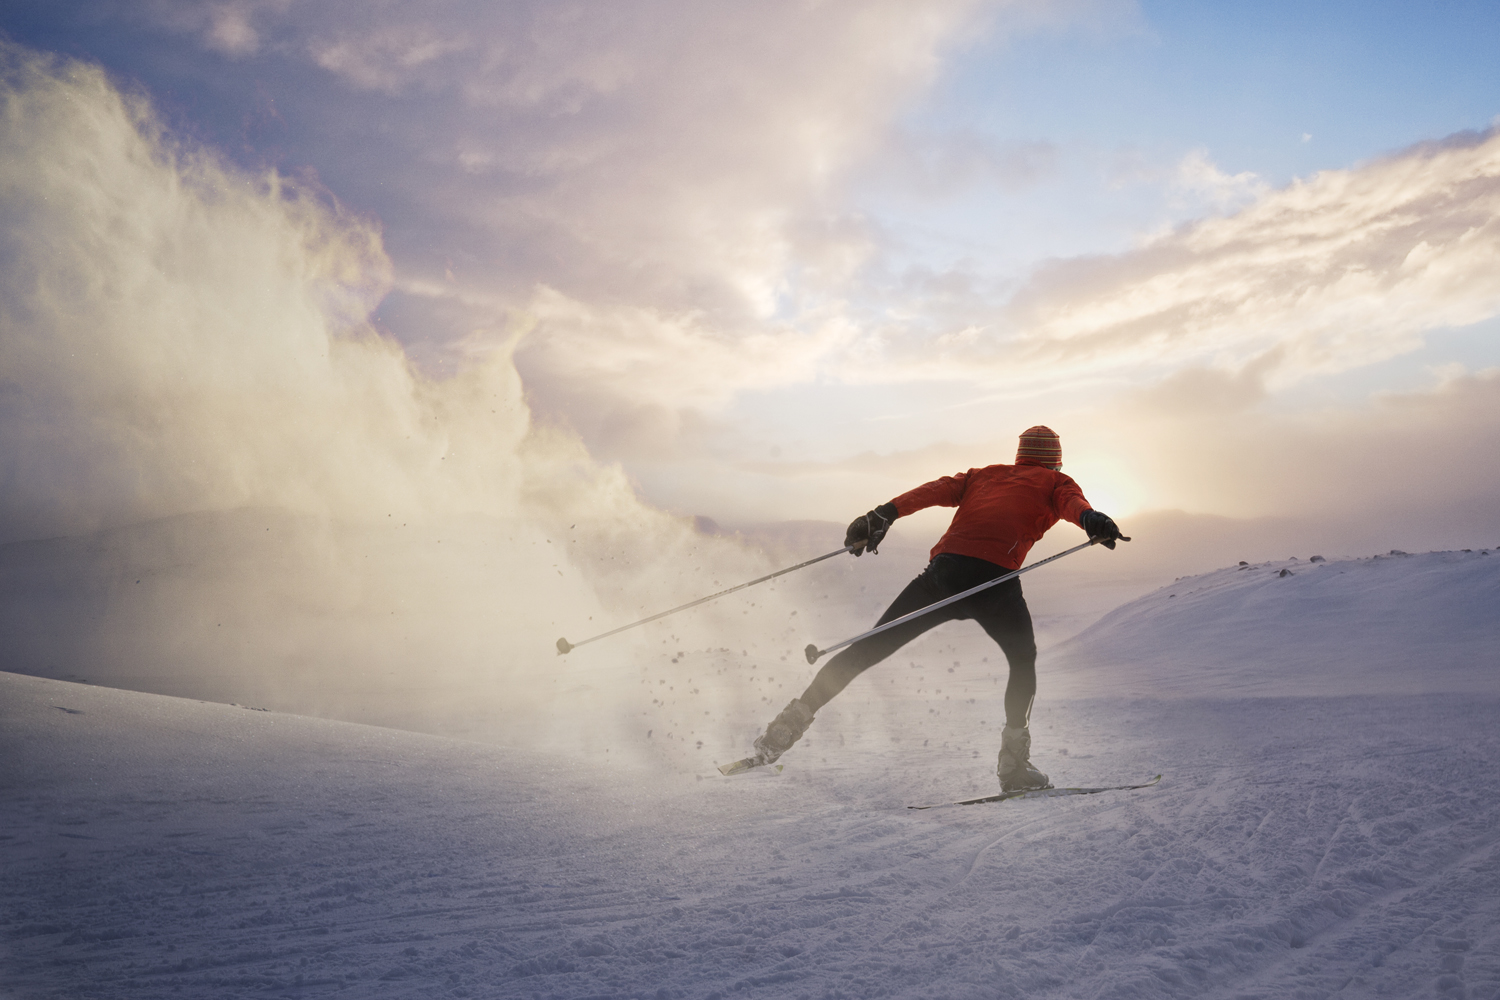 How To Buy Cross-Country Skis for Your Winter Escapades